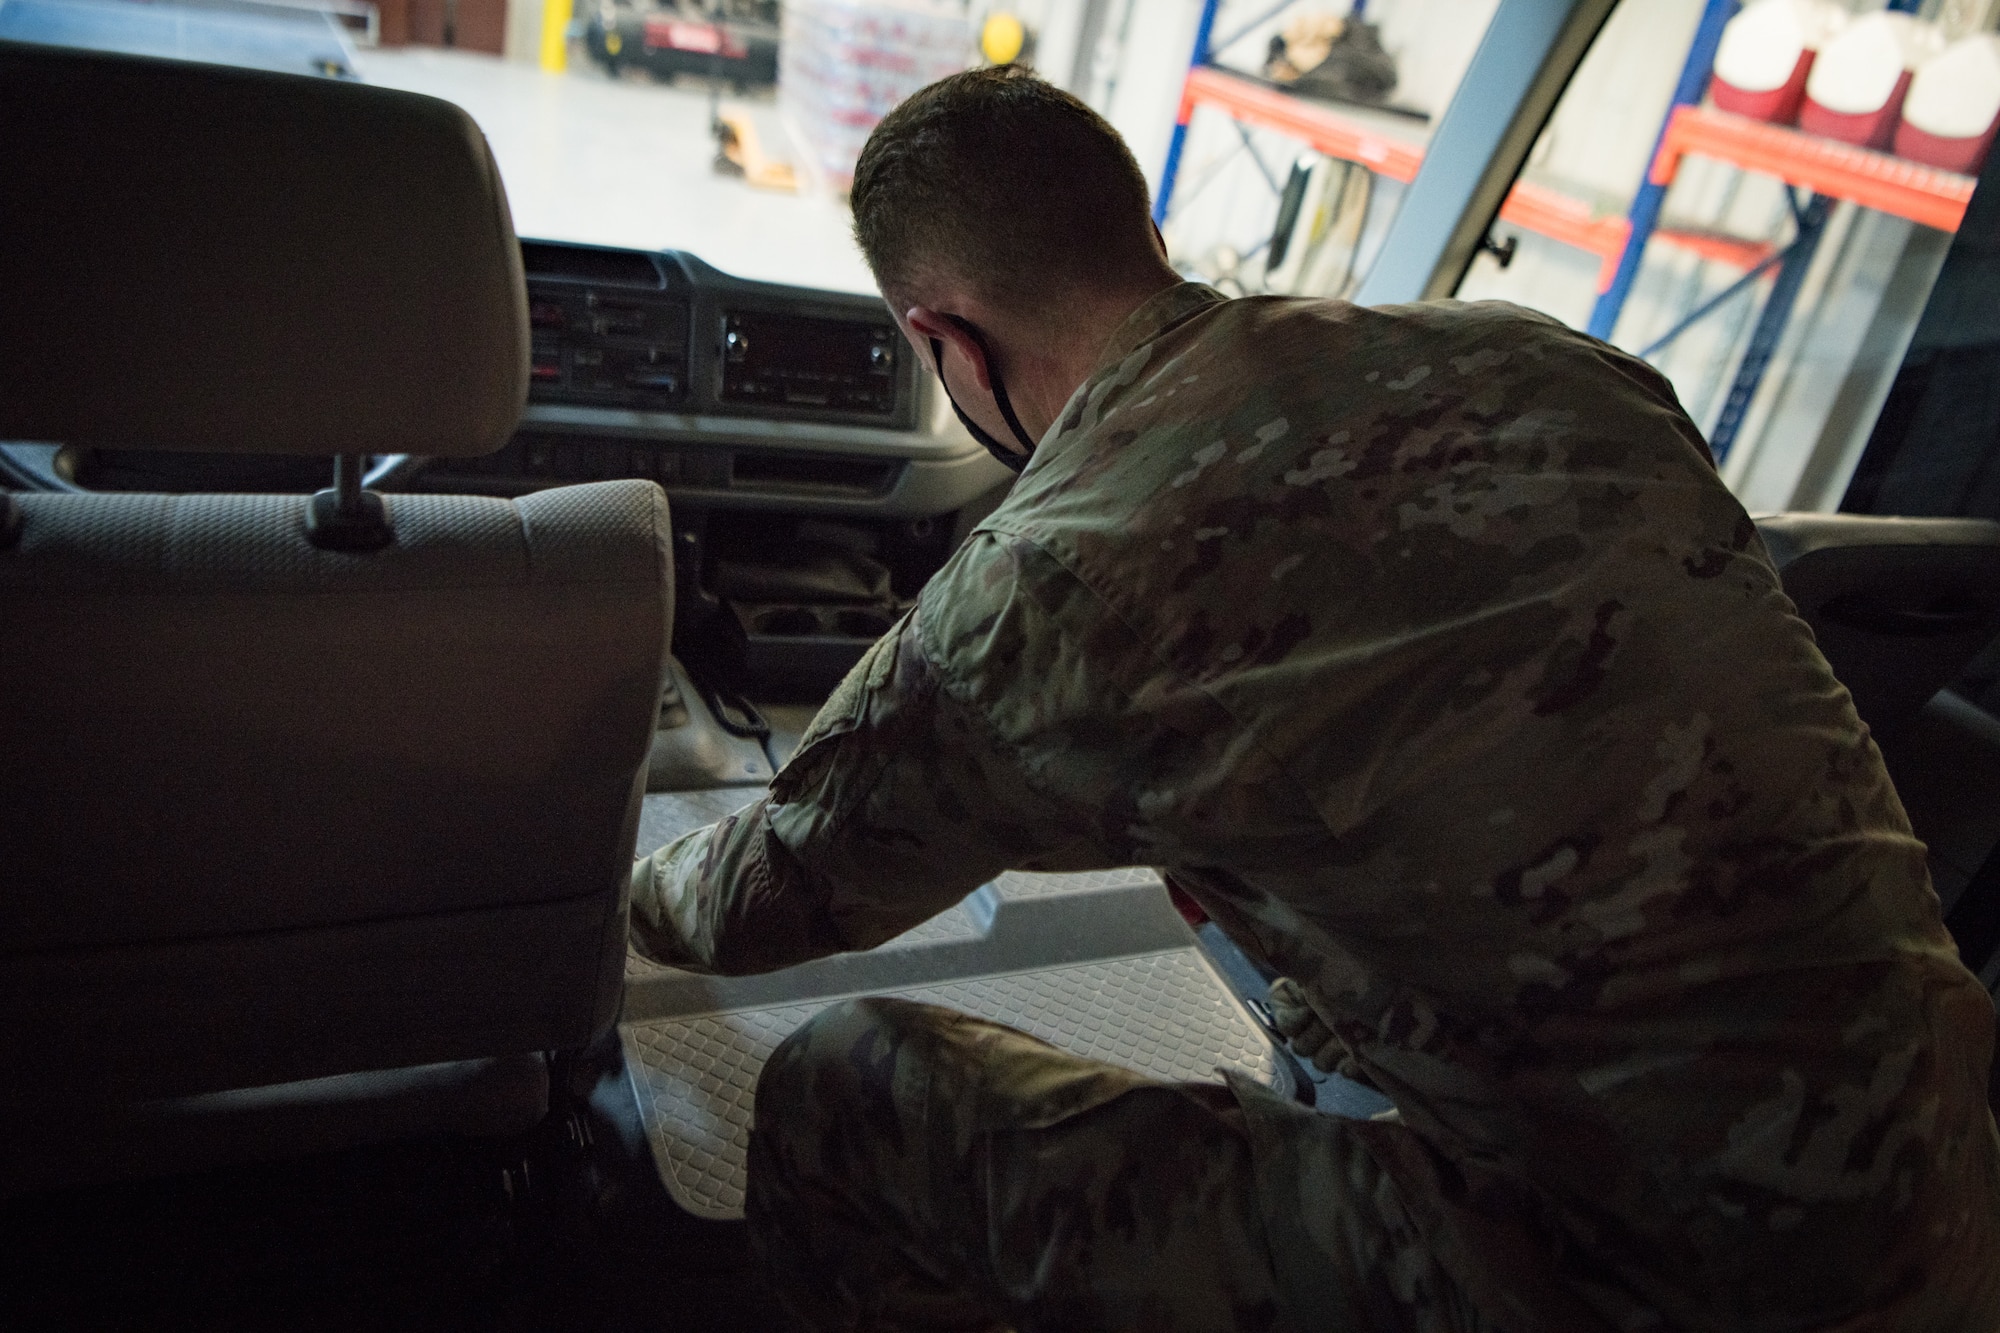 An airman replaces an engine cover on a bus